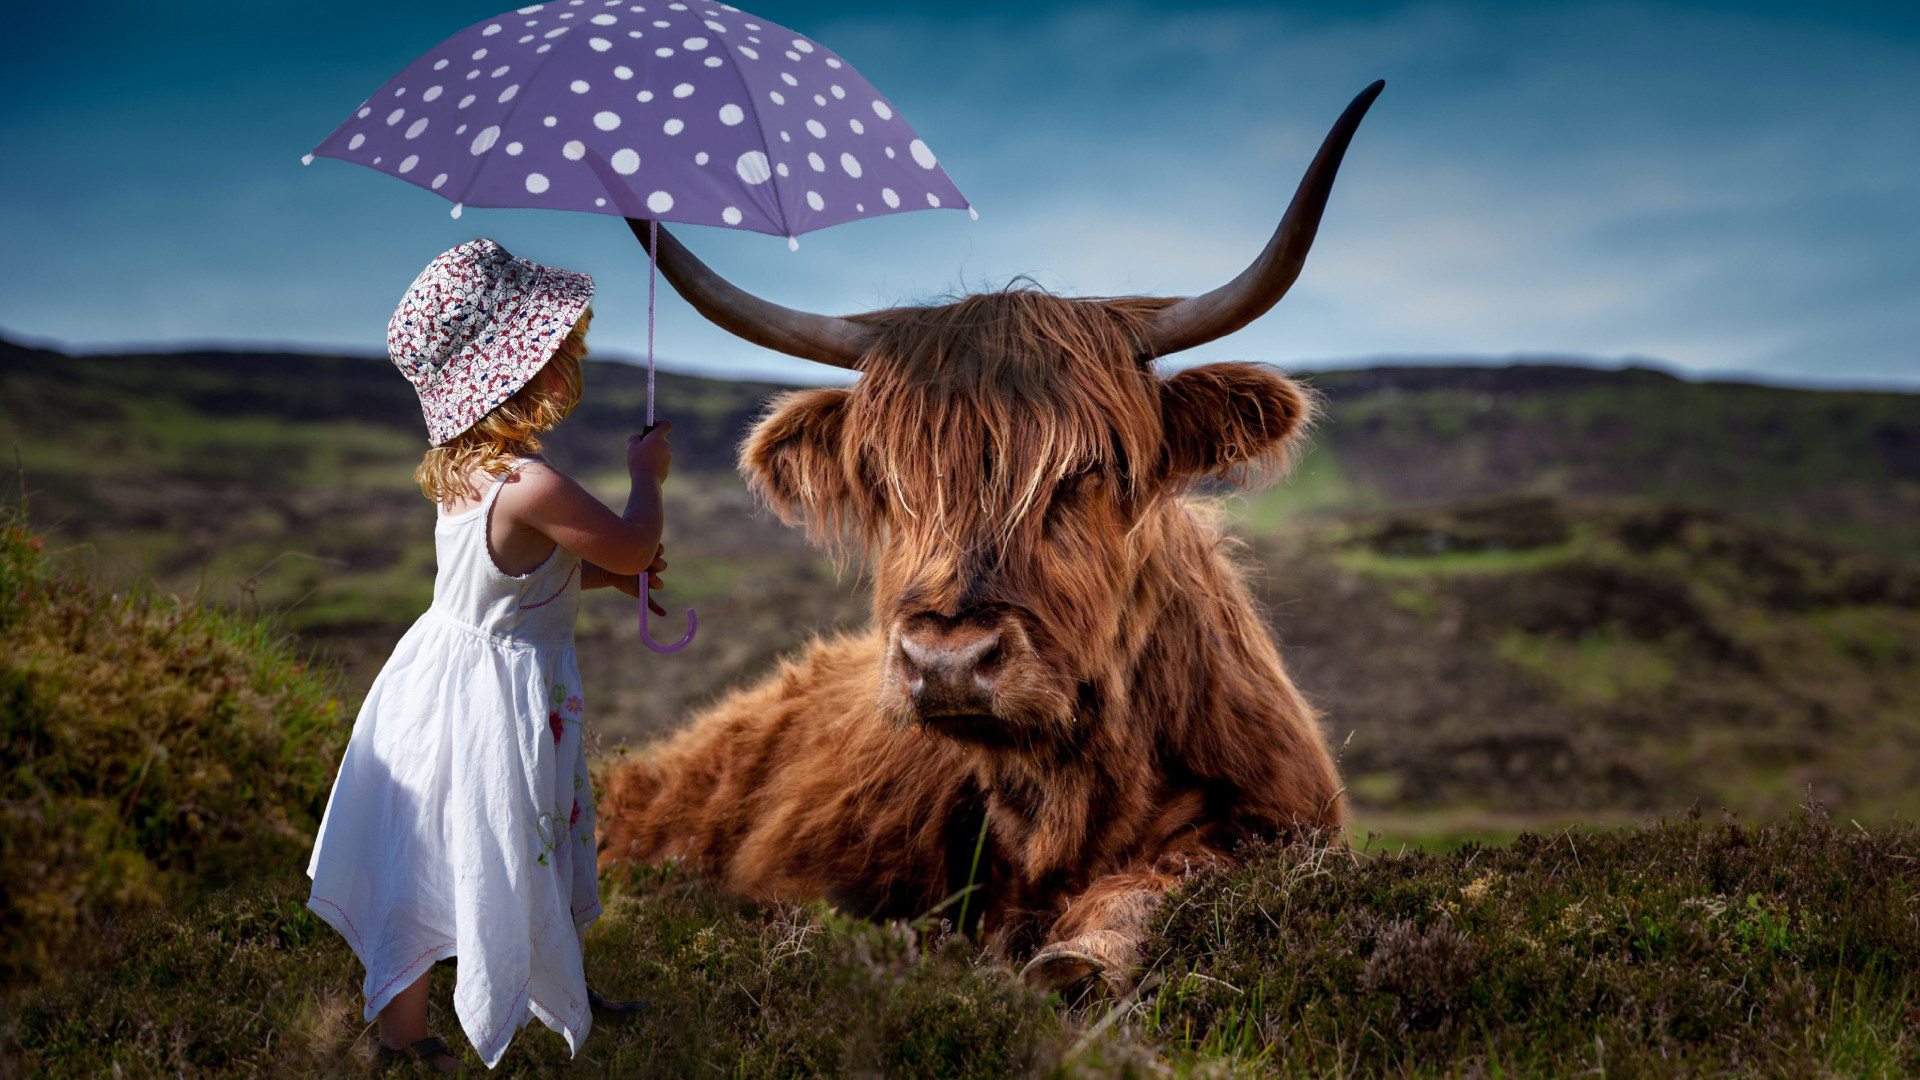 Child with the umbrella and the funny cow wallpaper 1920x1080